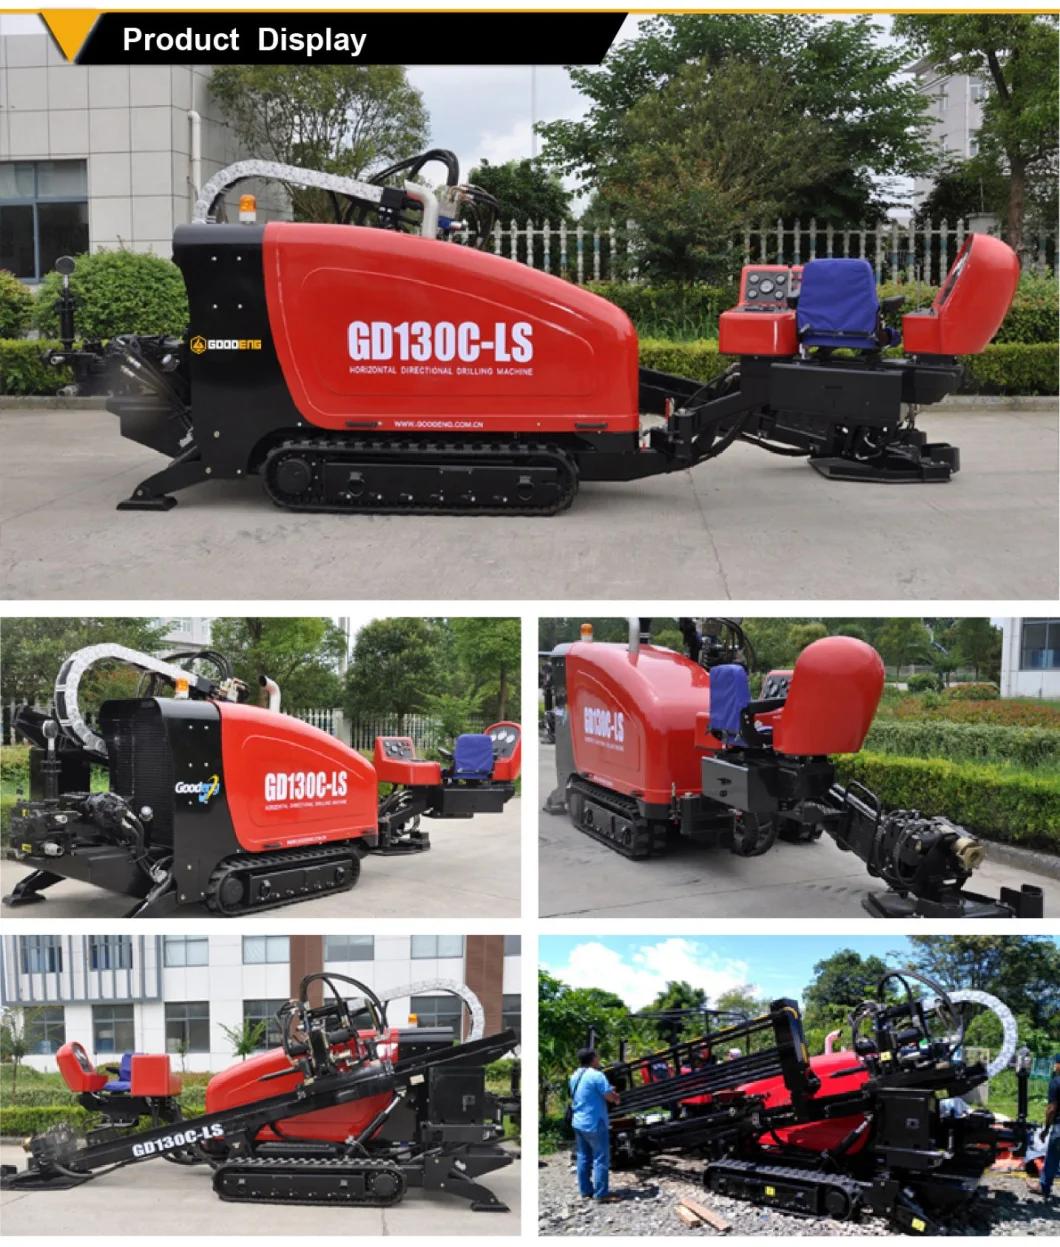 Goodeng GD130C-LS  low fuel consumption hdd machine